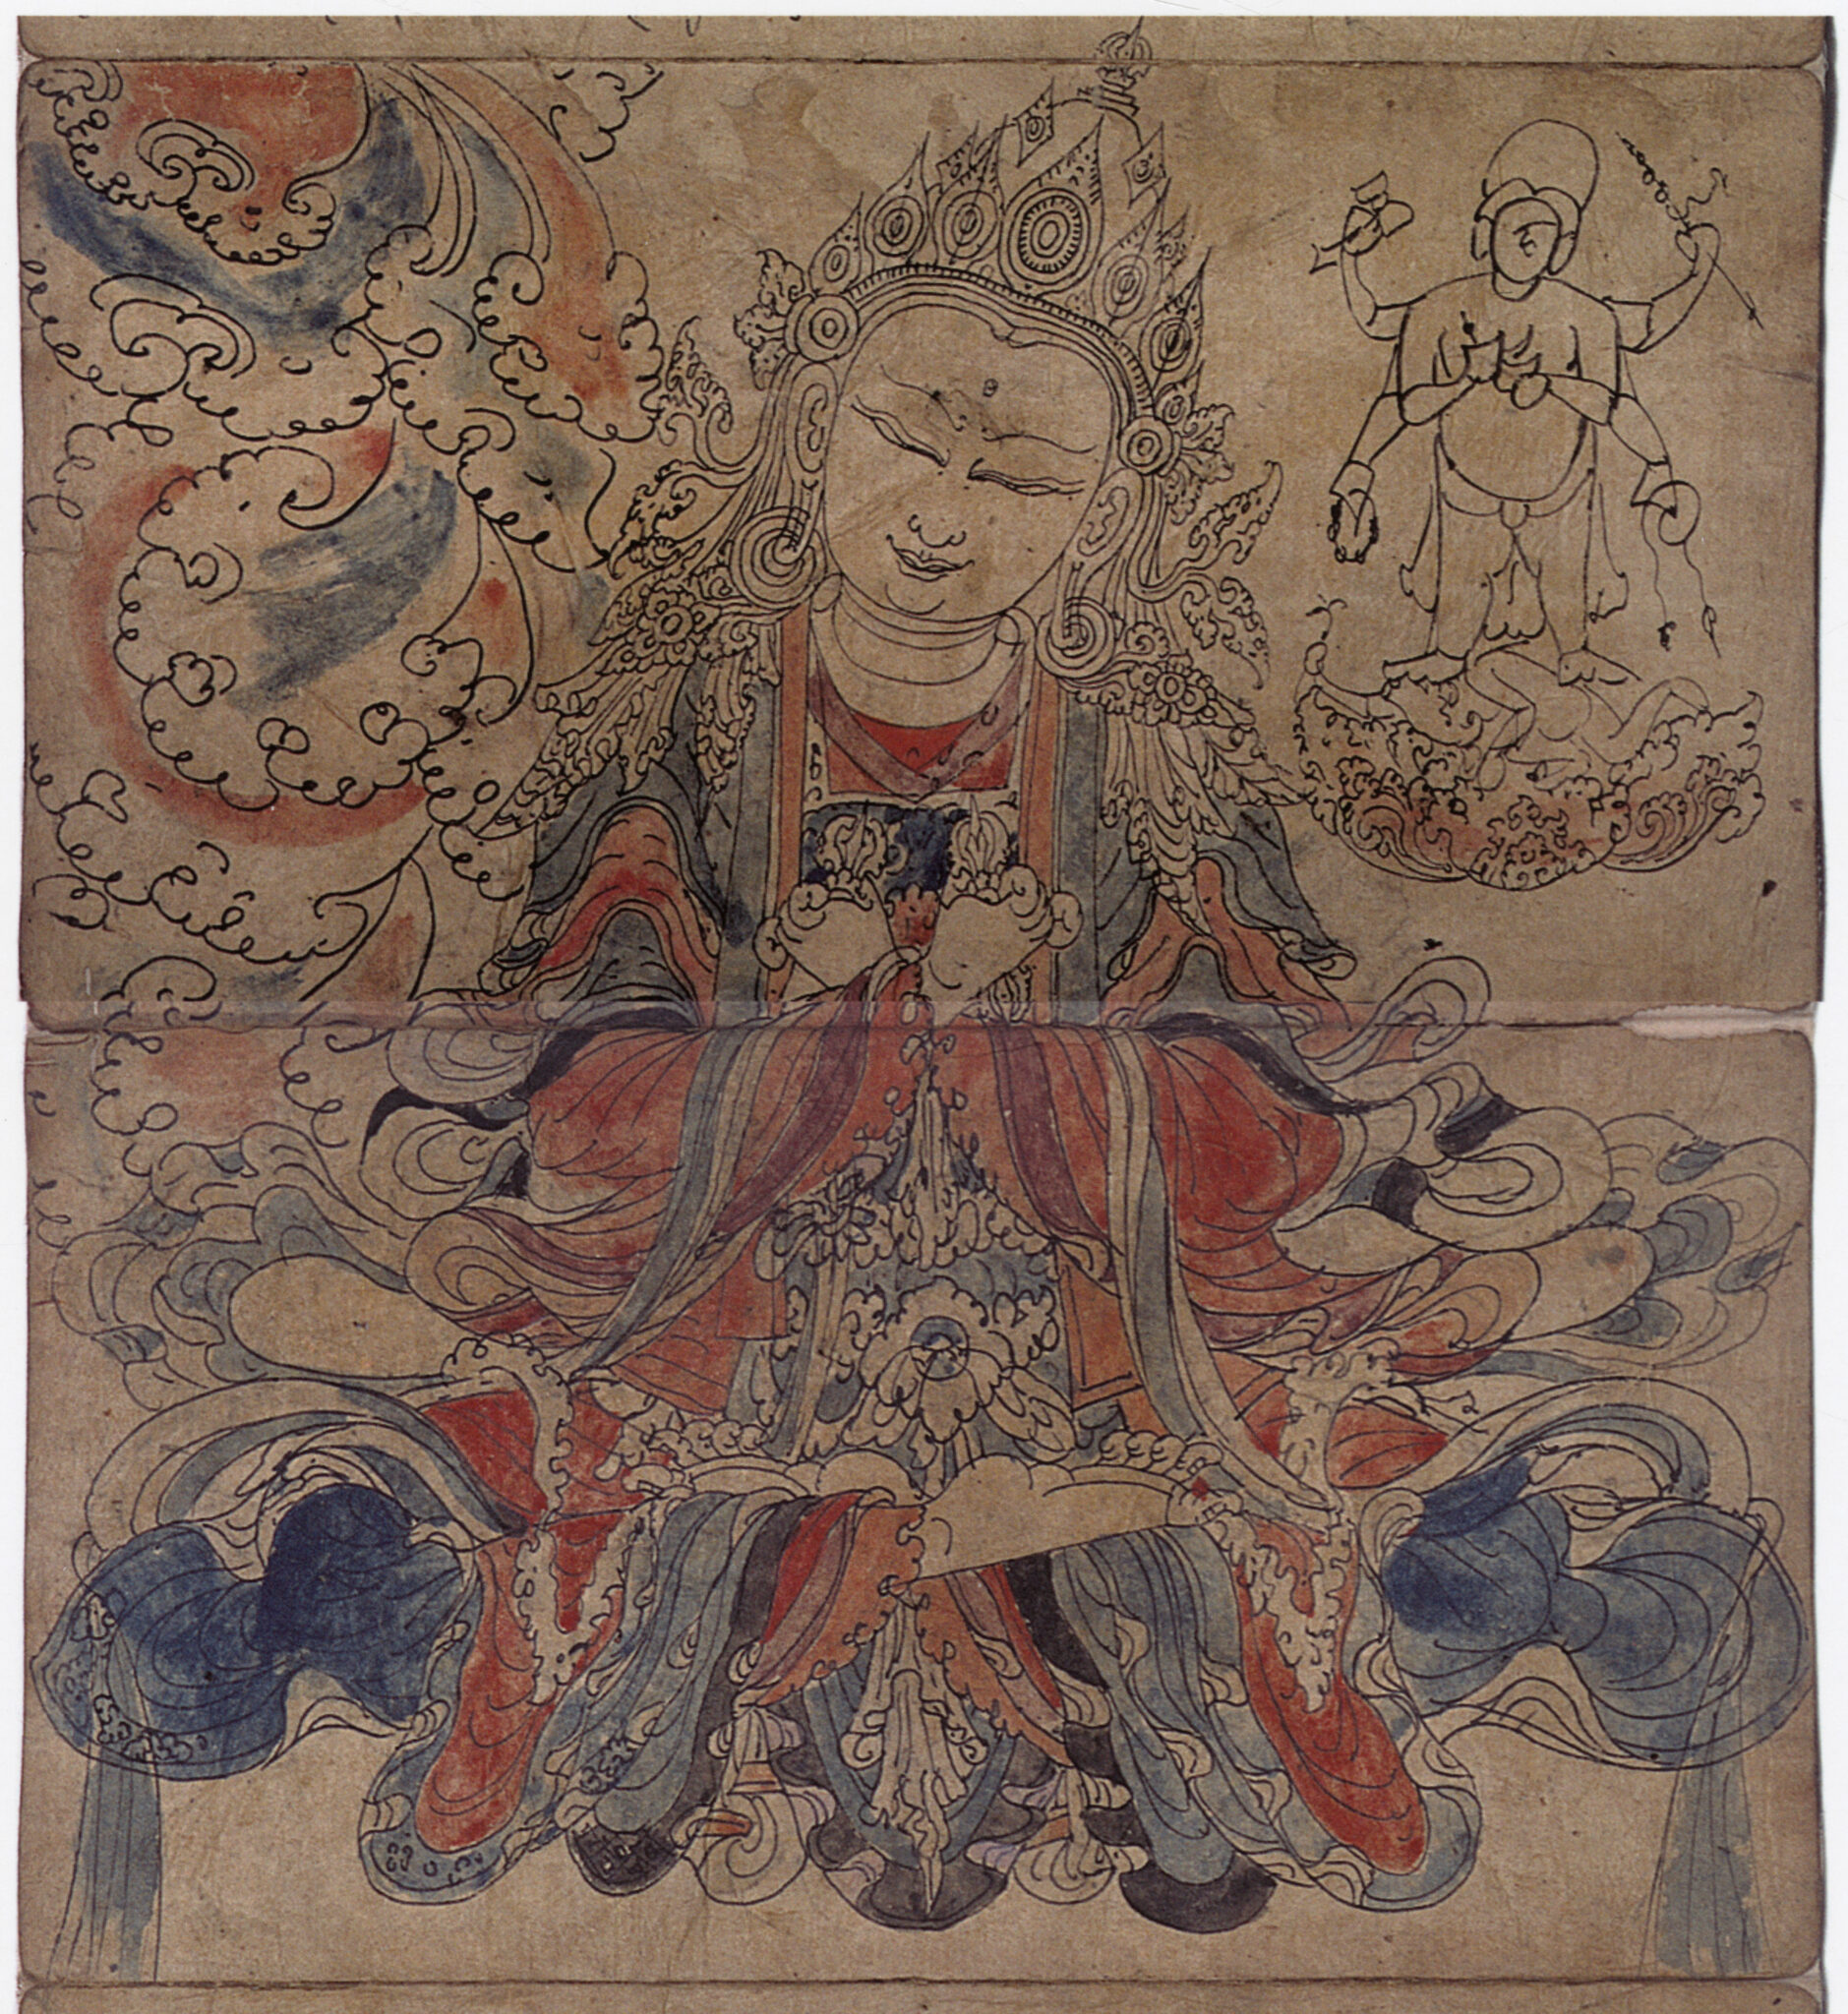 Line drawing on two panels of paper depicting Buddha in resplendent robe holding religious implements at chest